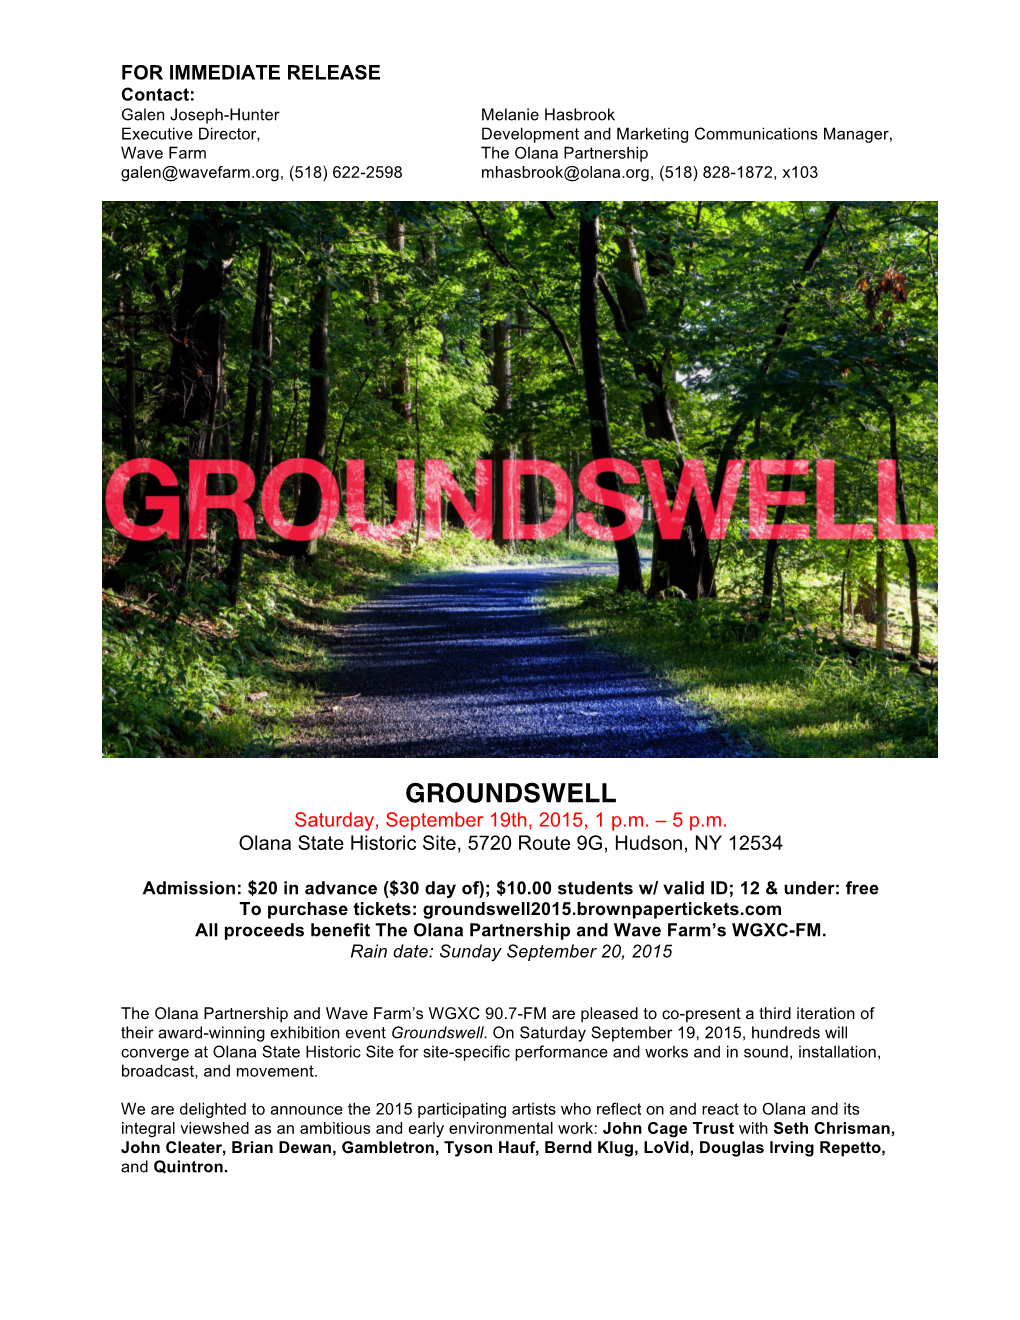 GROUNDSWELL Saturday, September 19Th, 2015, 1 P.M